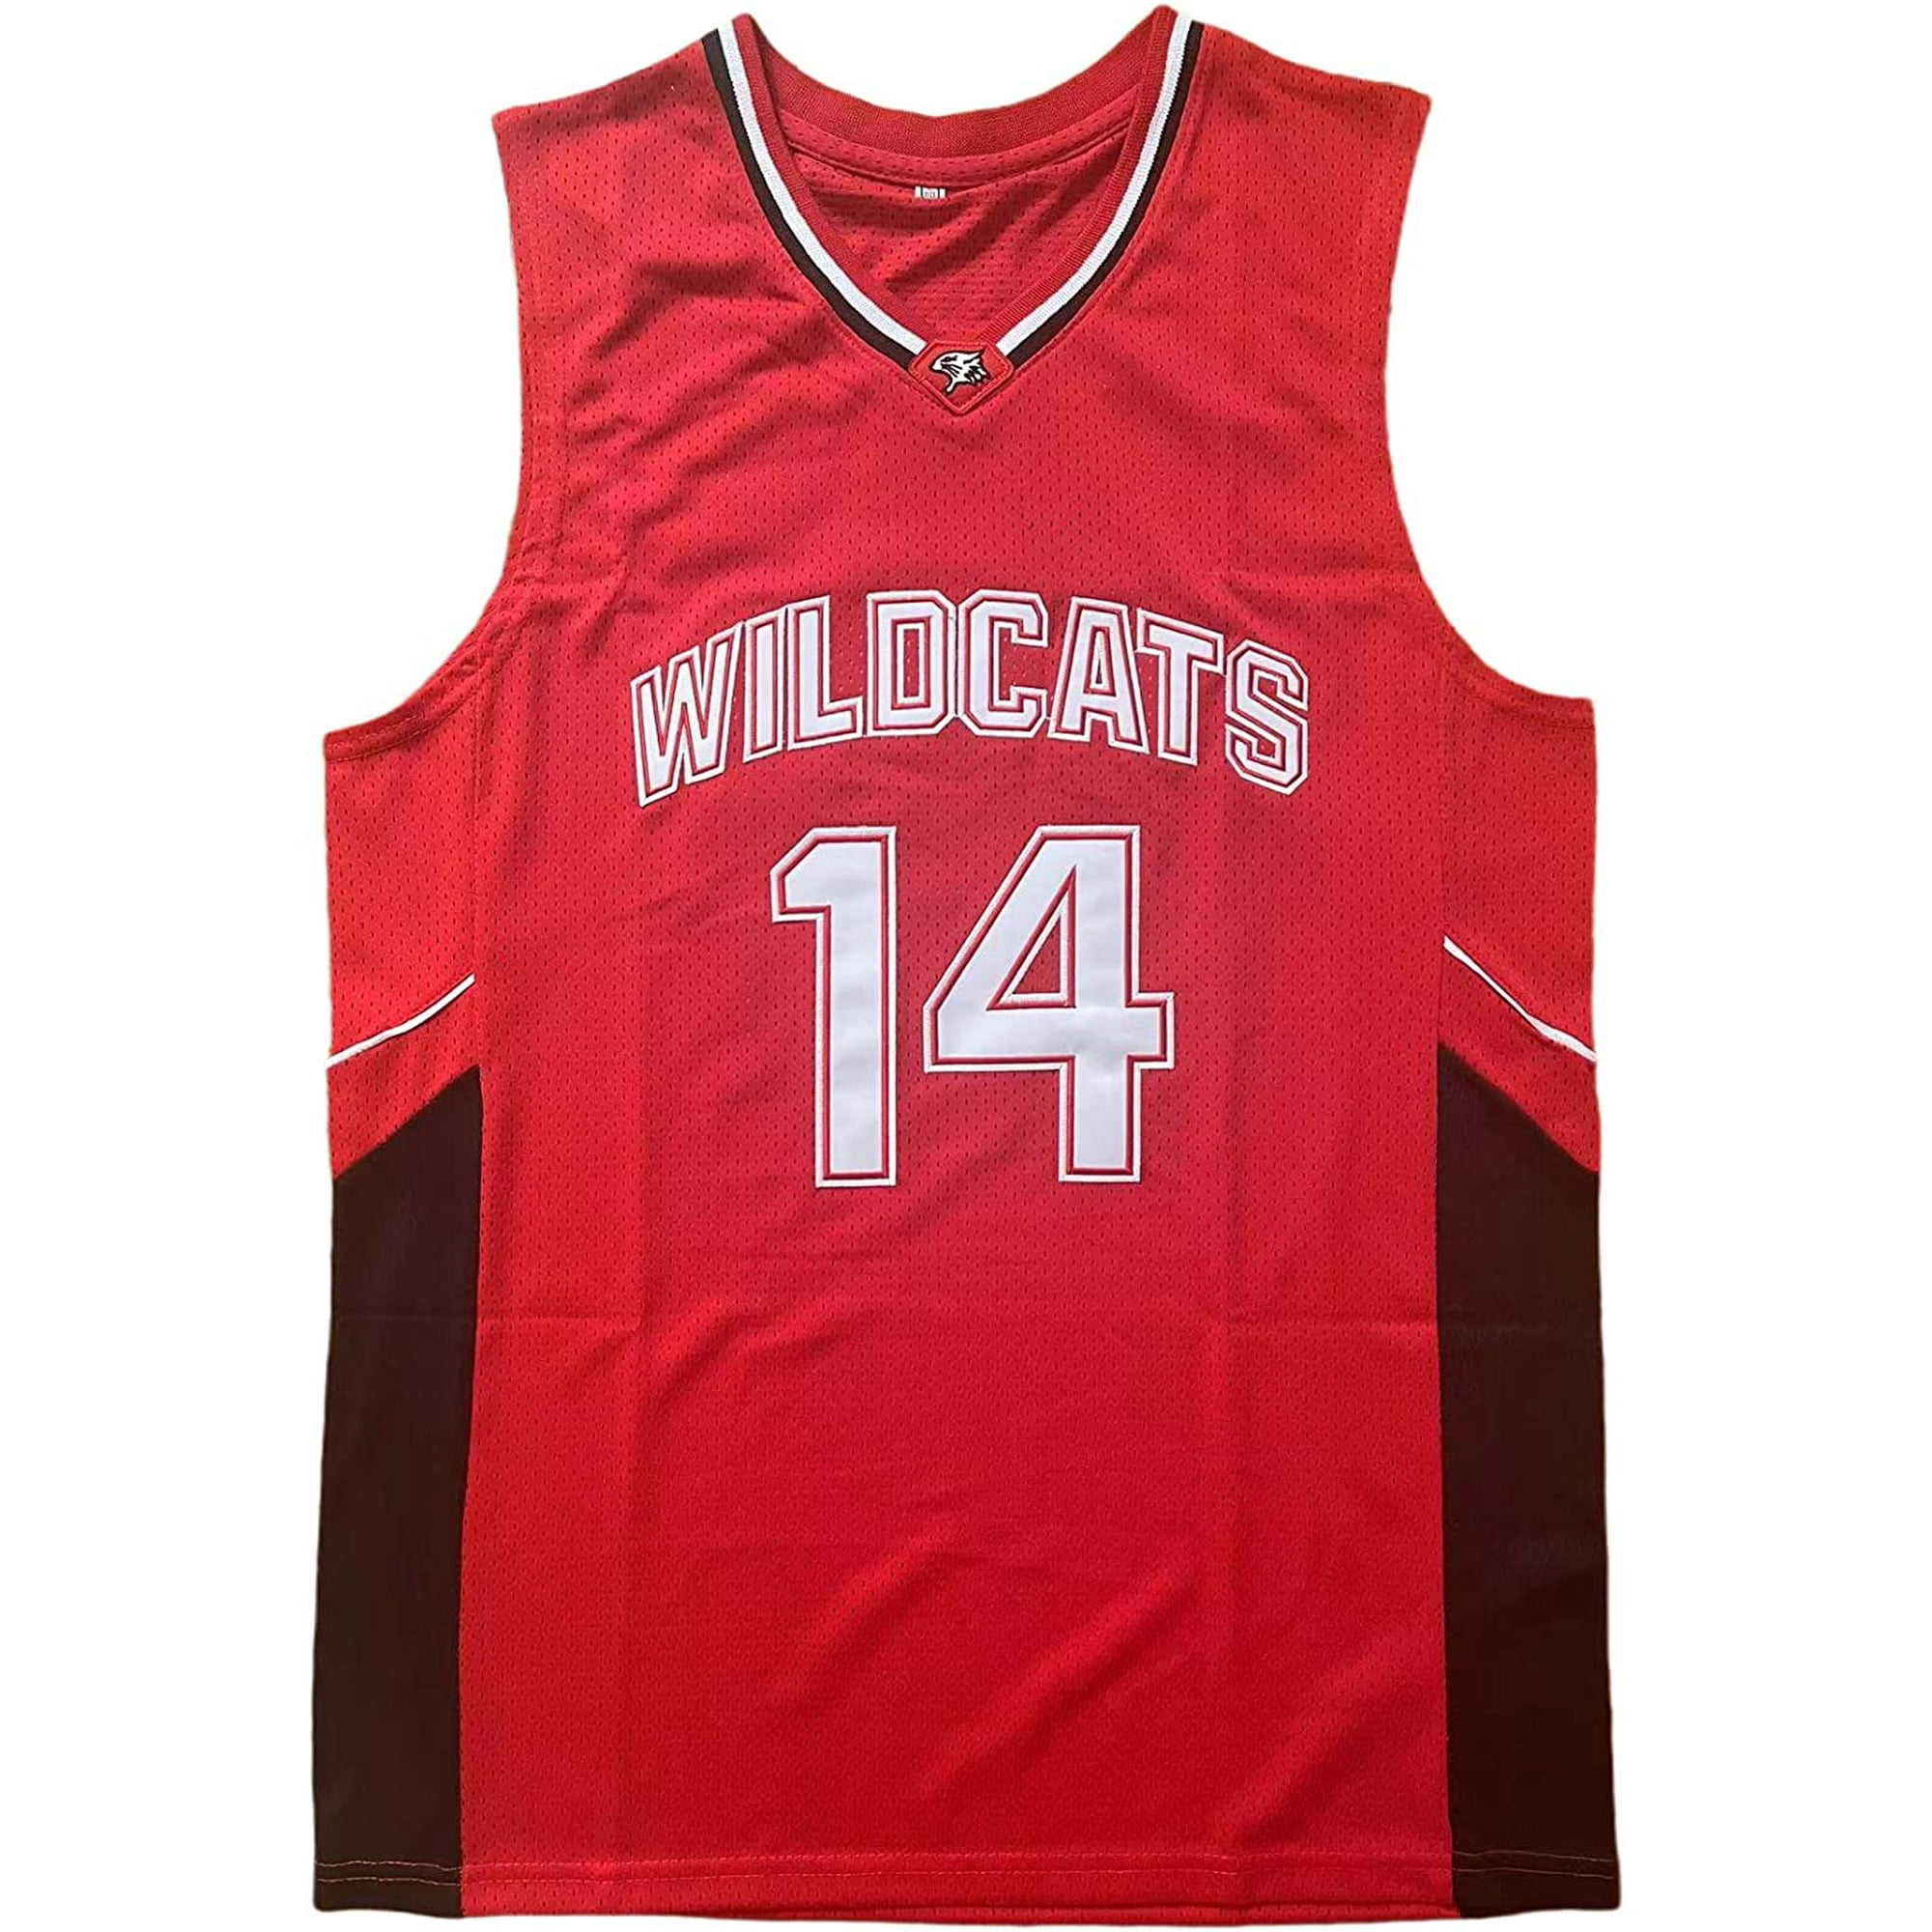 Troy Bolton 1 East High School Basketball Jersey Wildcats 